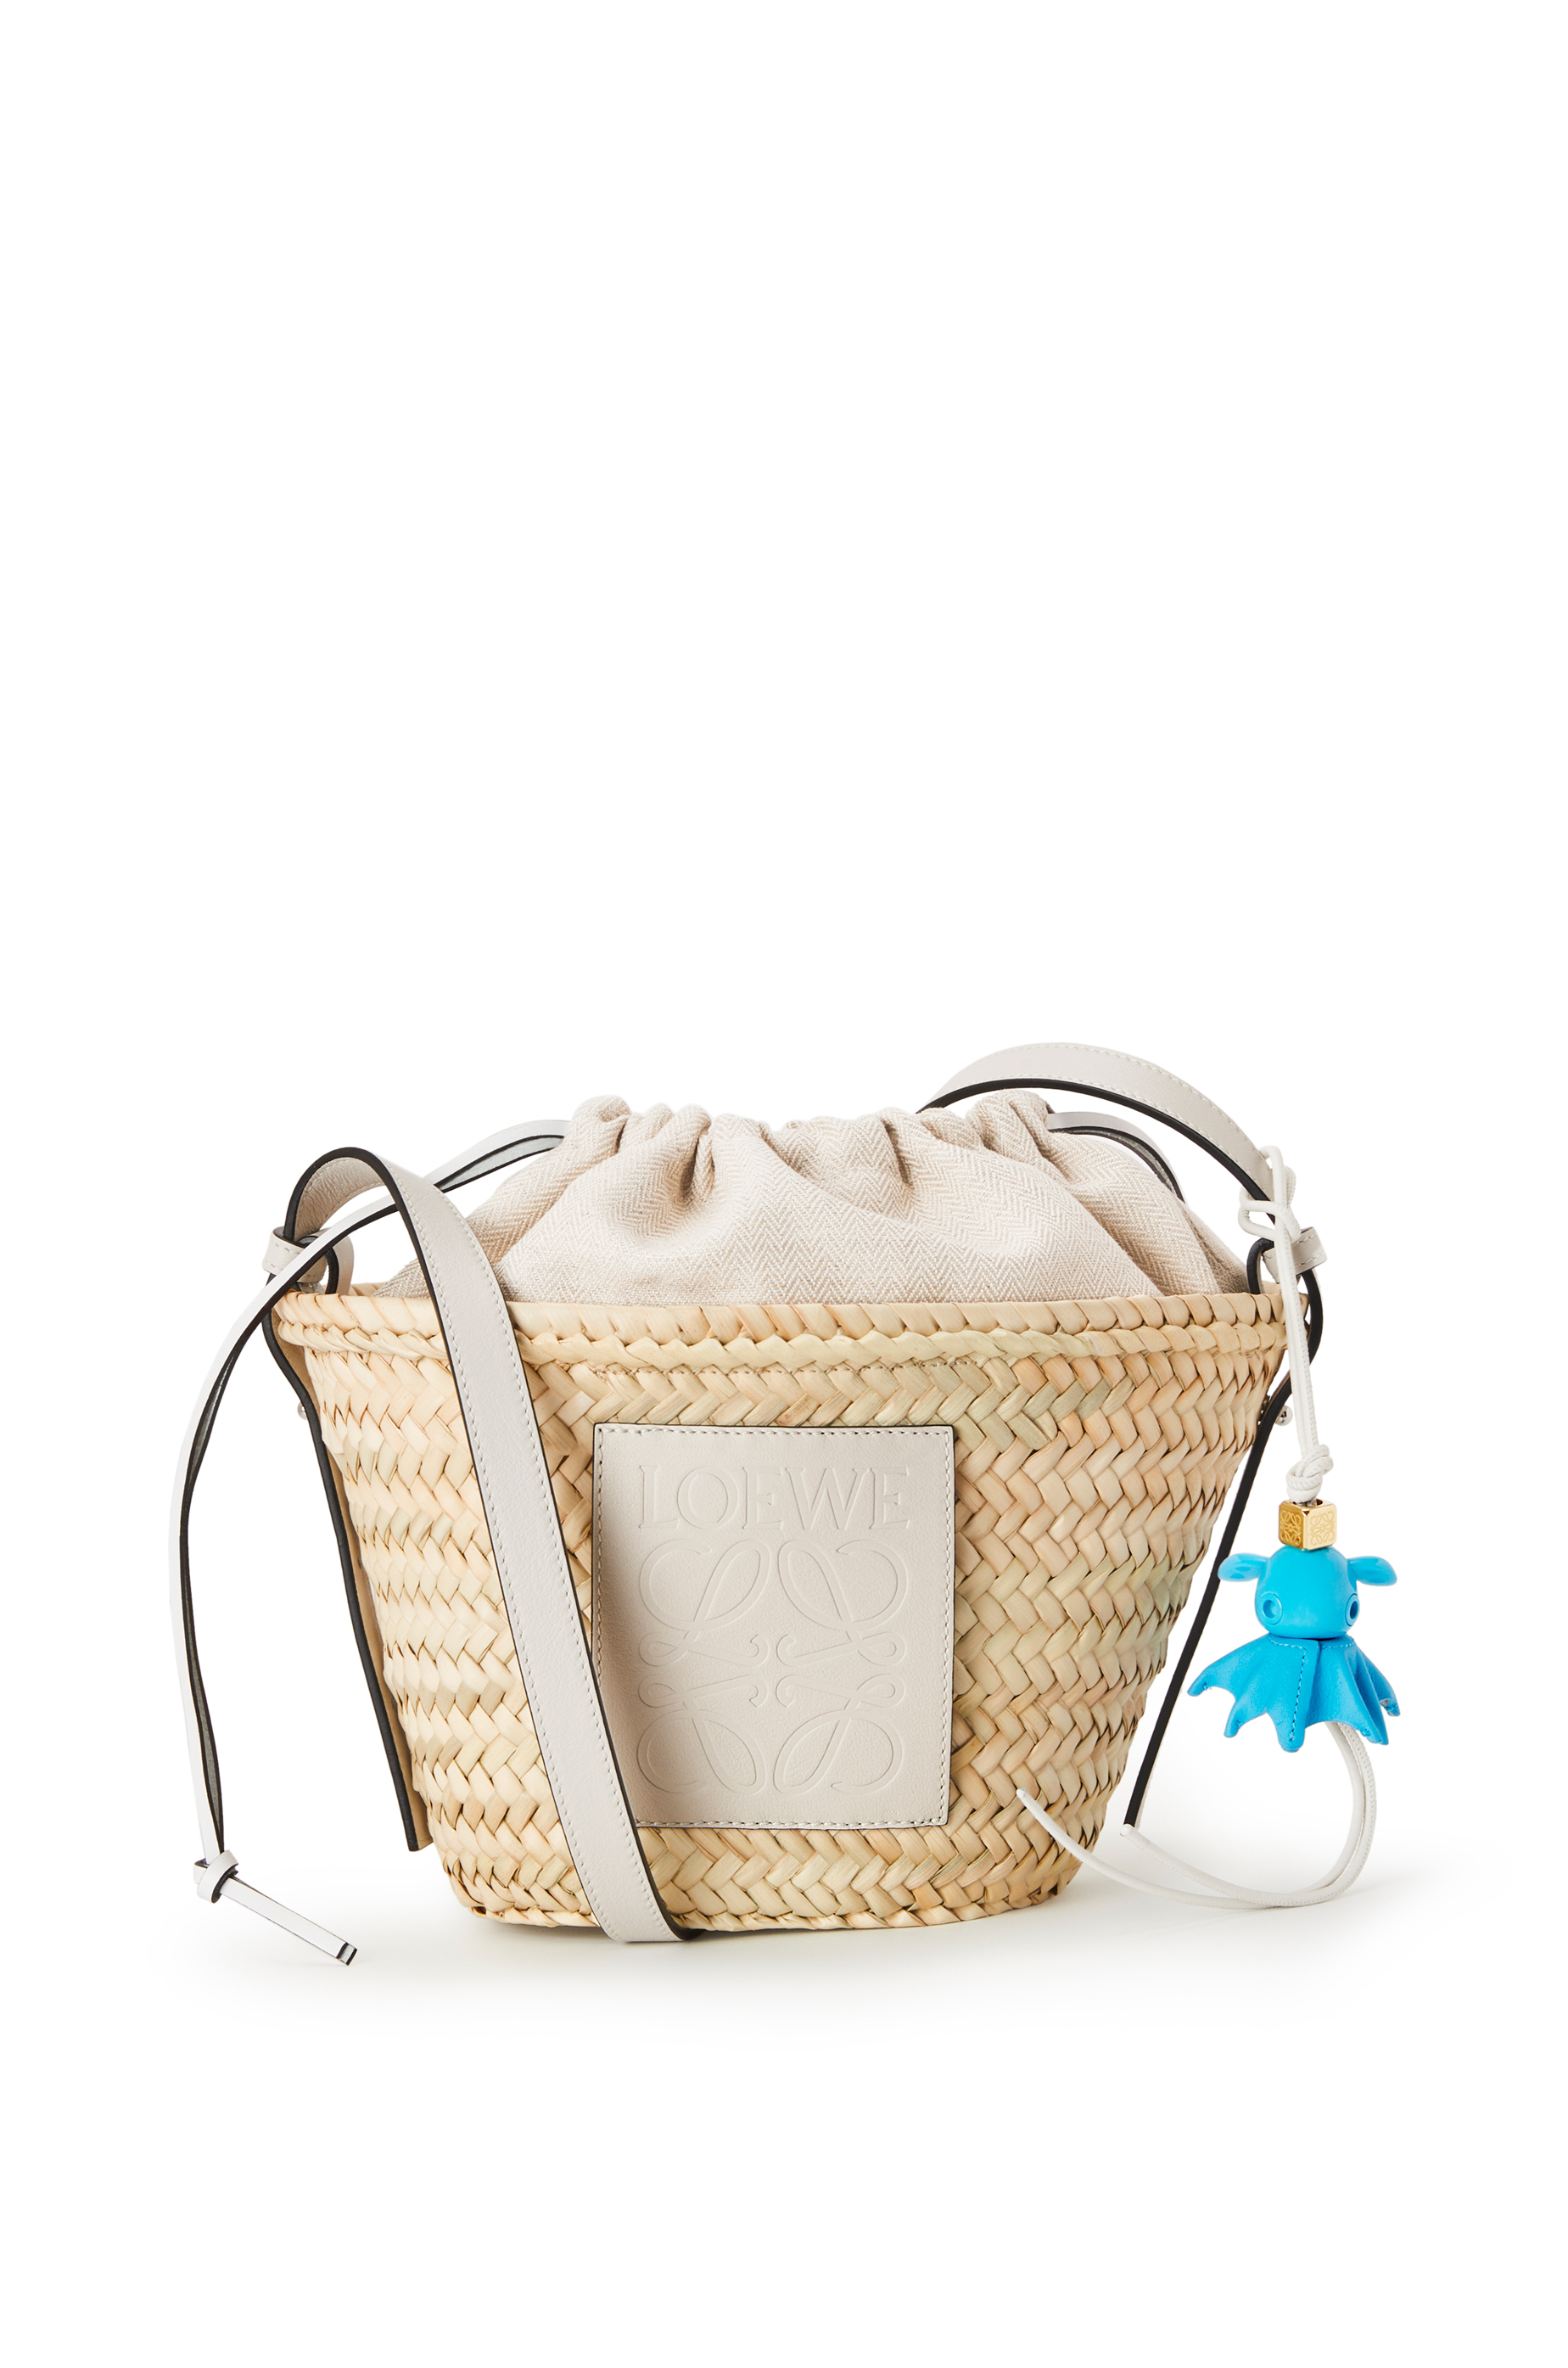 Drawstring bucket bag in palm leaf and calfskin & Dumbo octopus